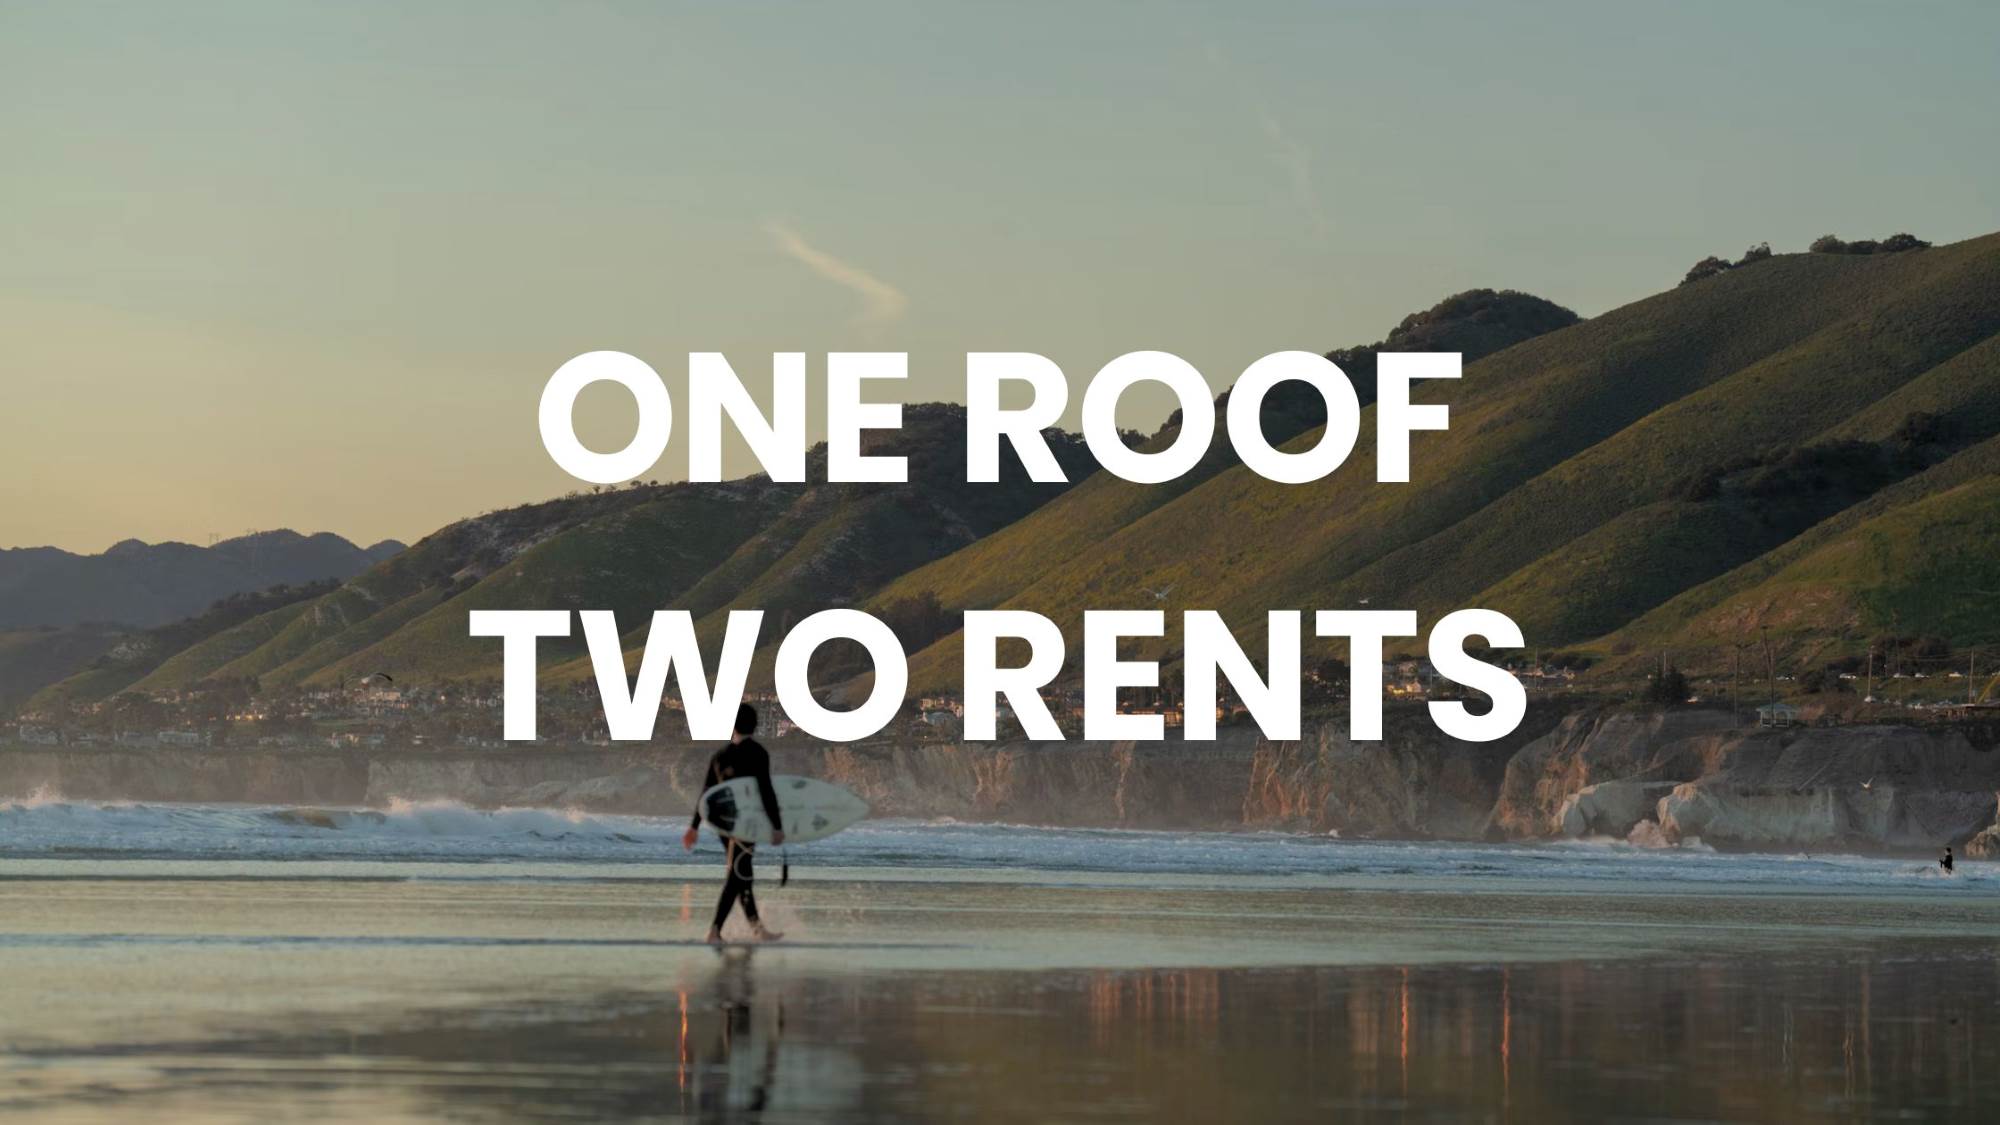 Surfer walking towards surf with green mountains and a cliff-edge town, "ONE ROOF TWO RENTS" text